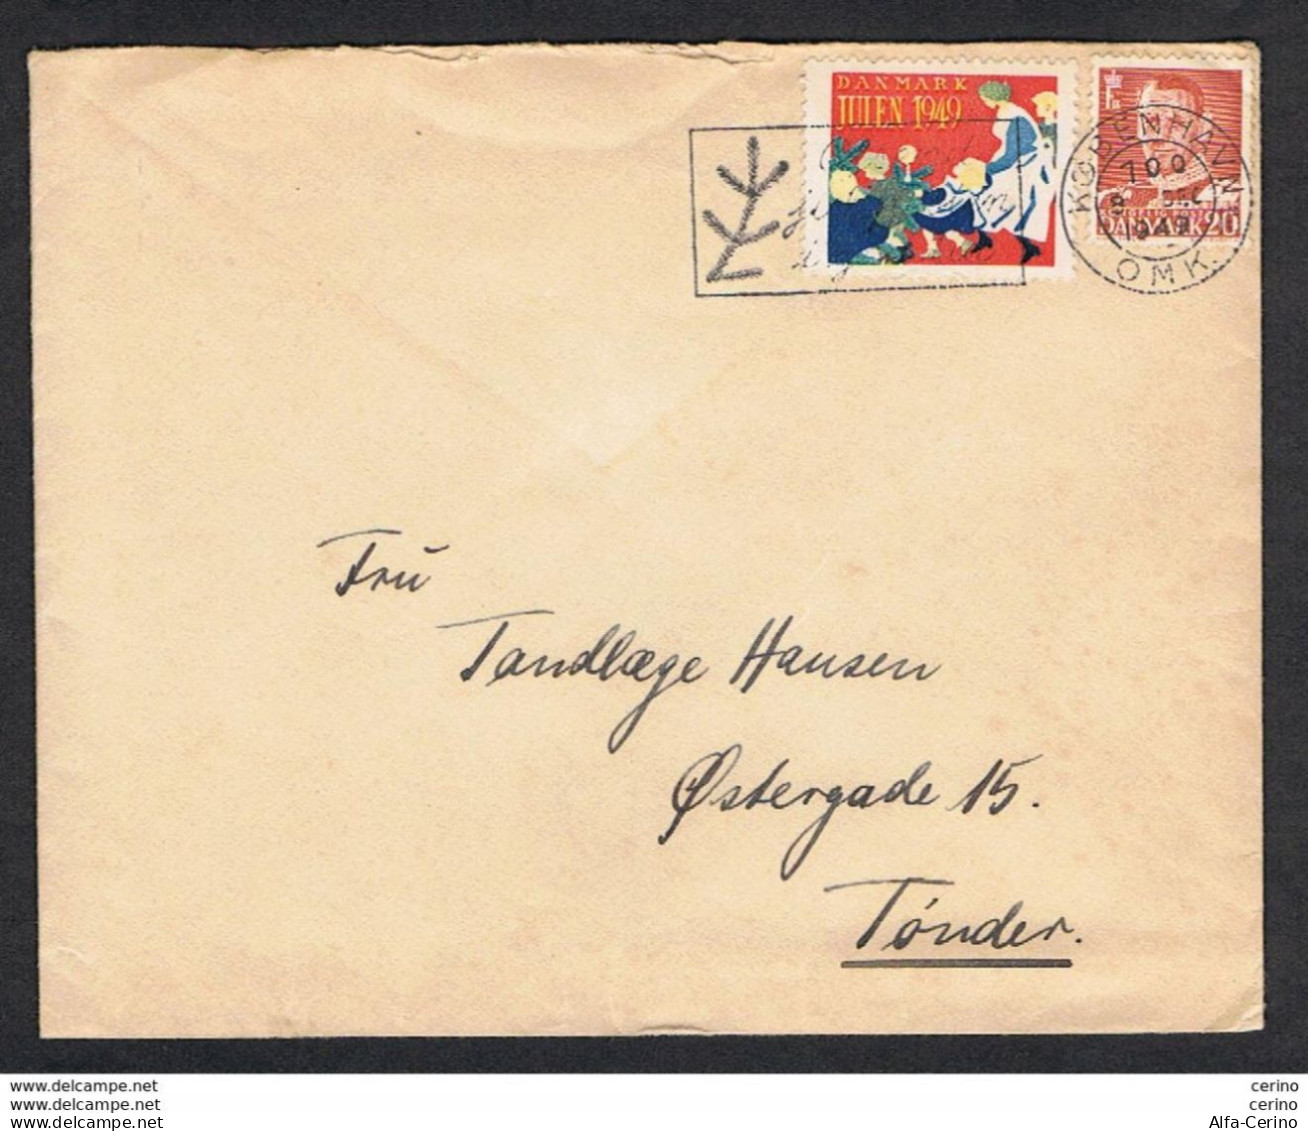 DENMARK: 1949 COVERT WITH 20 Ore (317) + 2 CLOSED LETTER FOR INSIDE. - Lettres & Documents